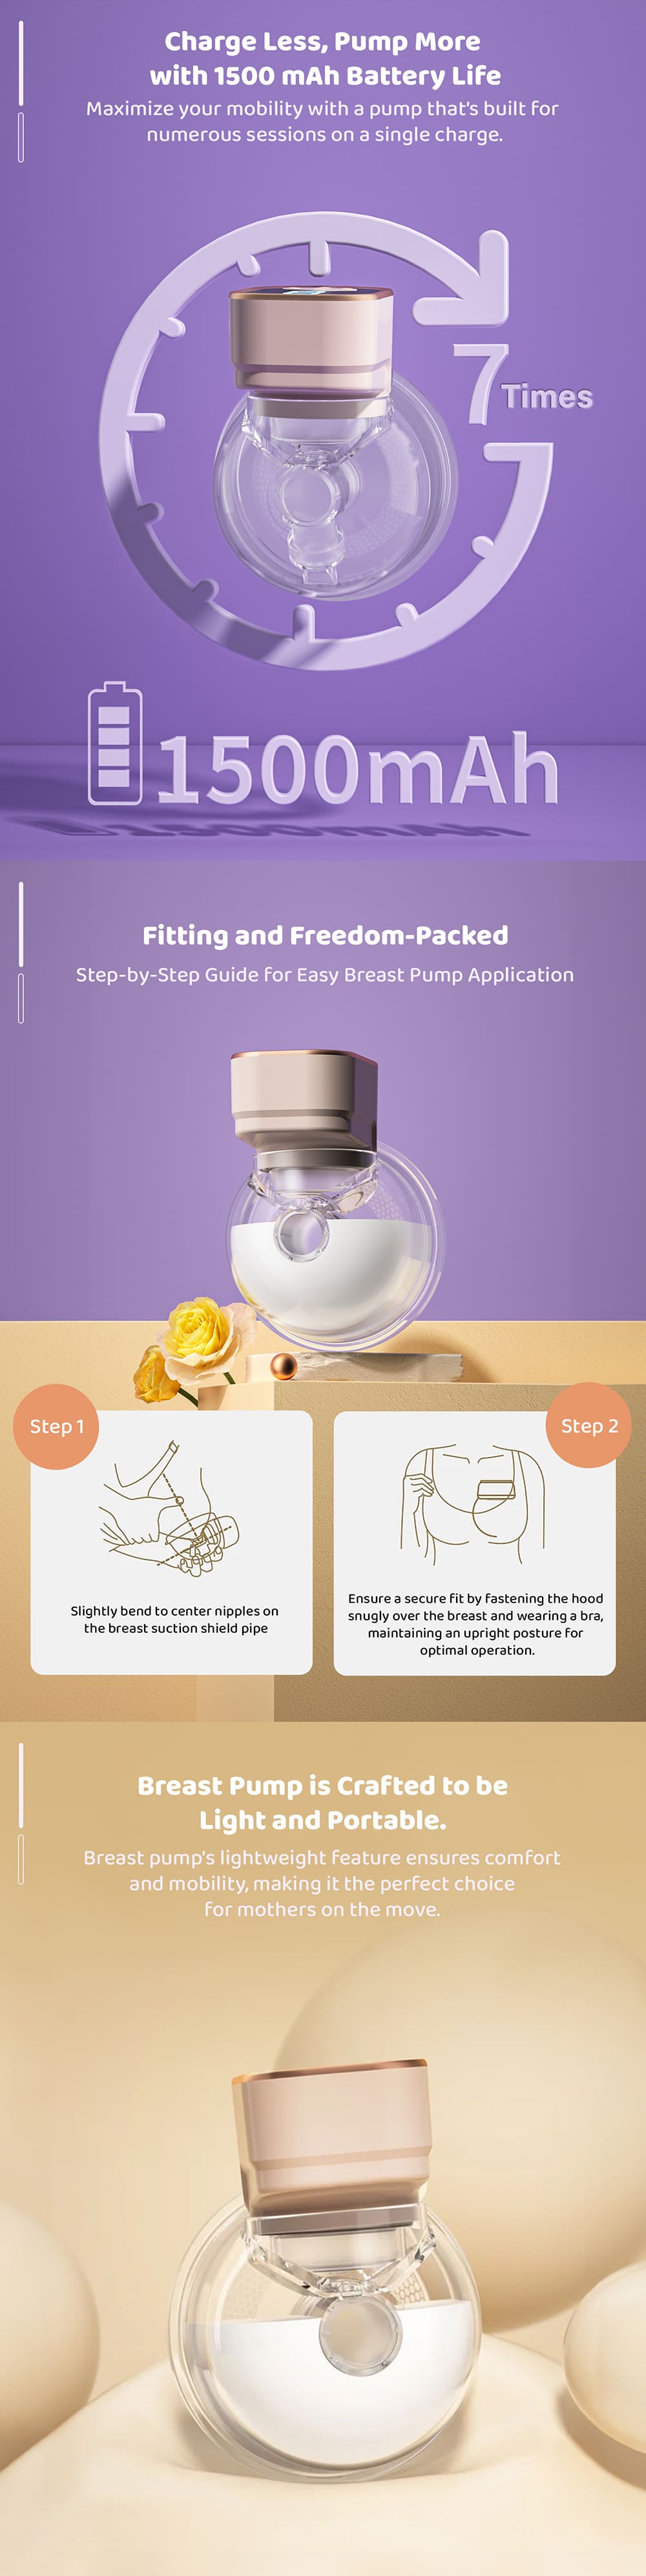 lightweight and Portable Wearable Breast Pump